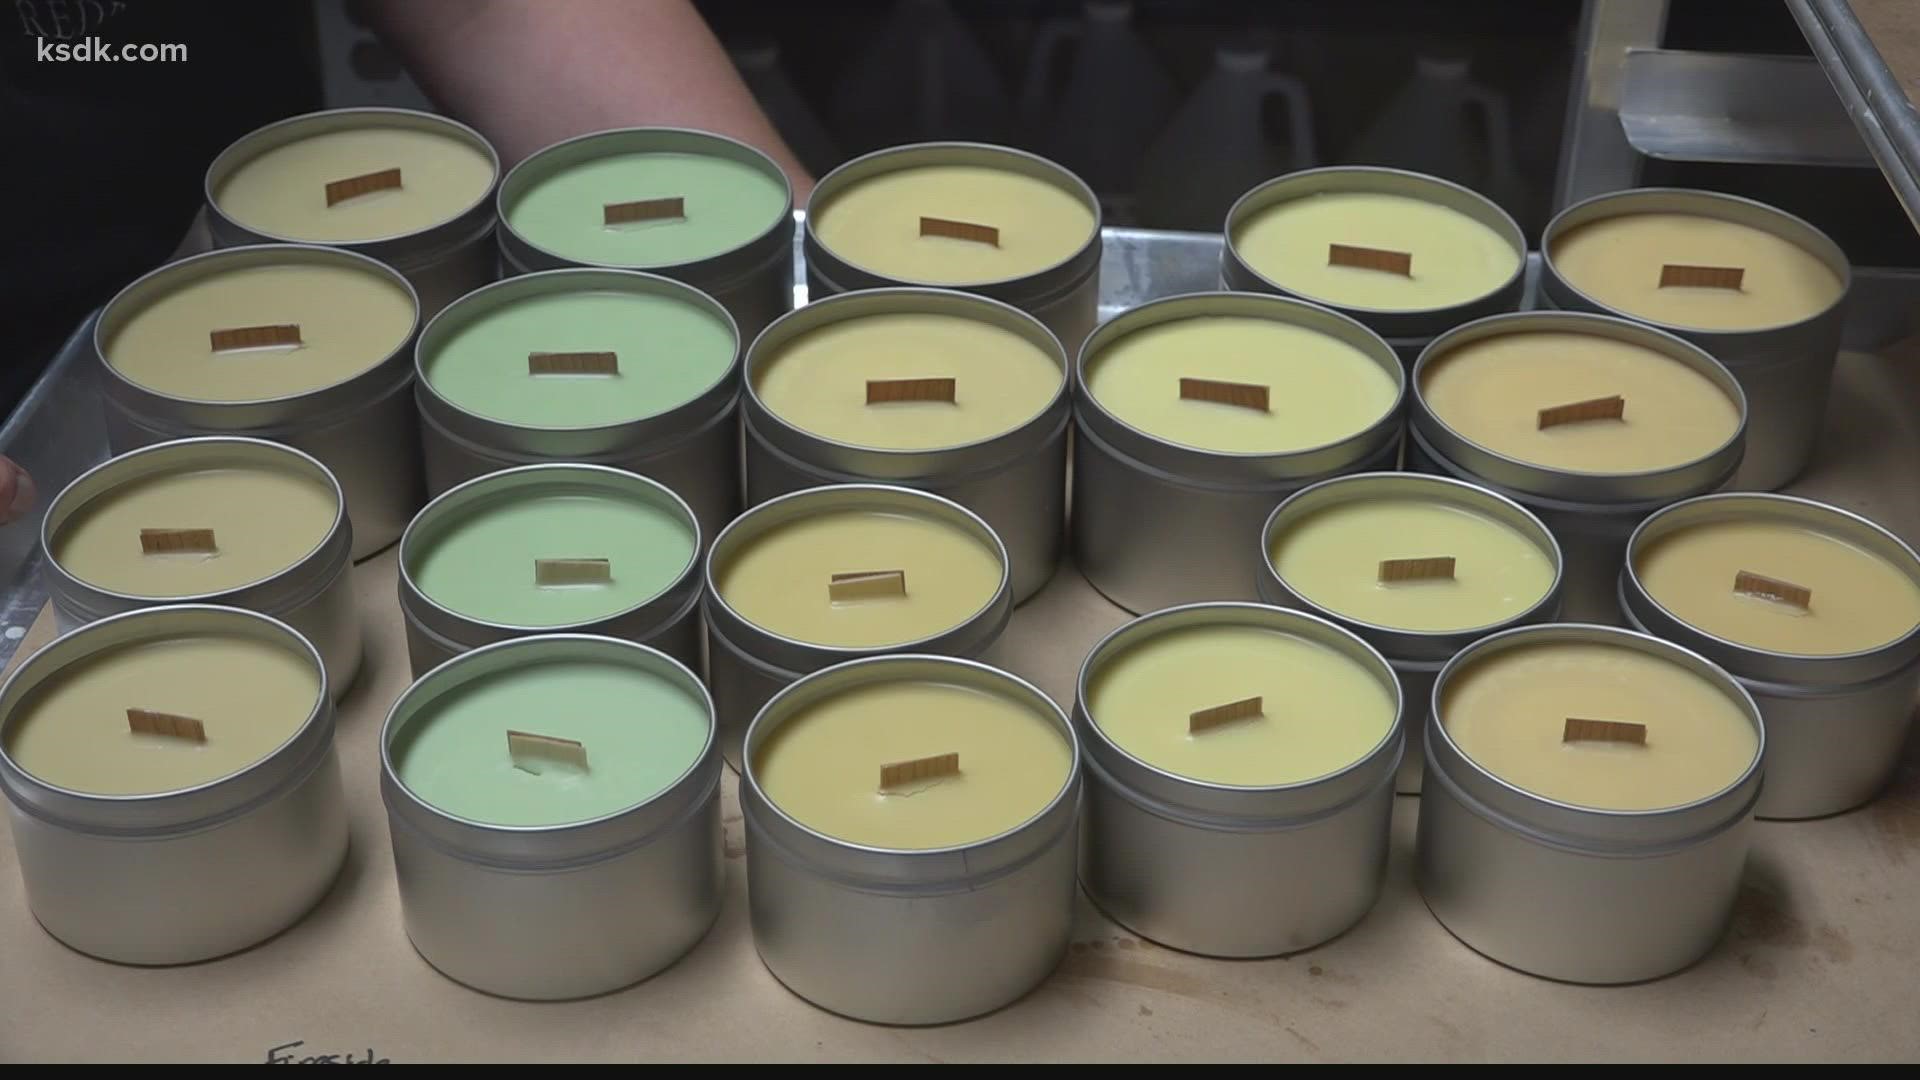 Katherine Miller started making candles and wax melts as a hobby a few years ago when a craft fair kicked it into high gear.